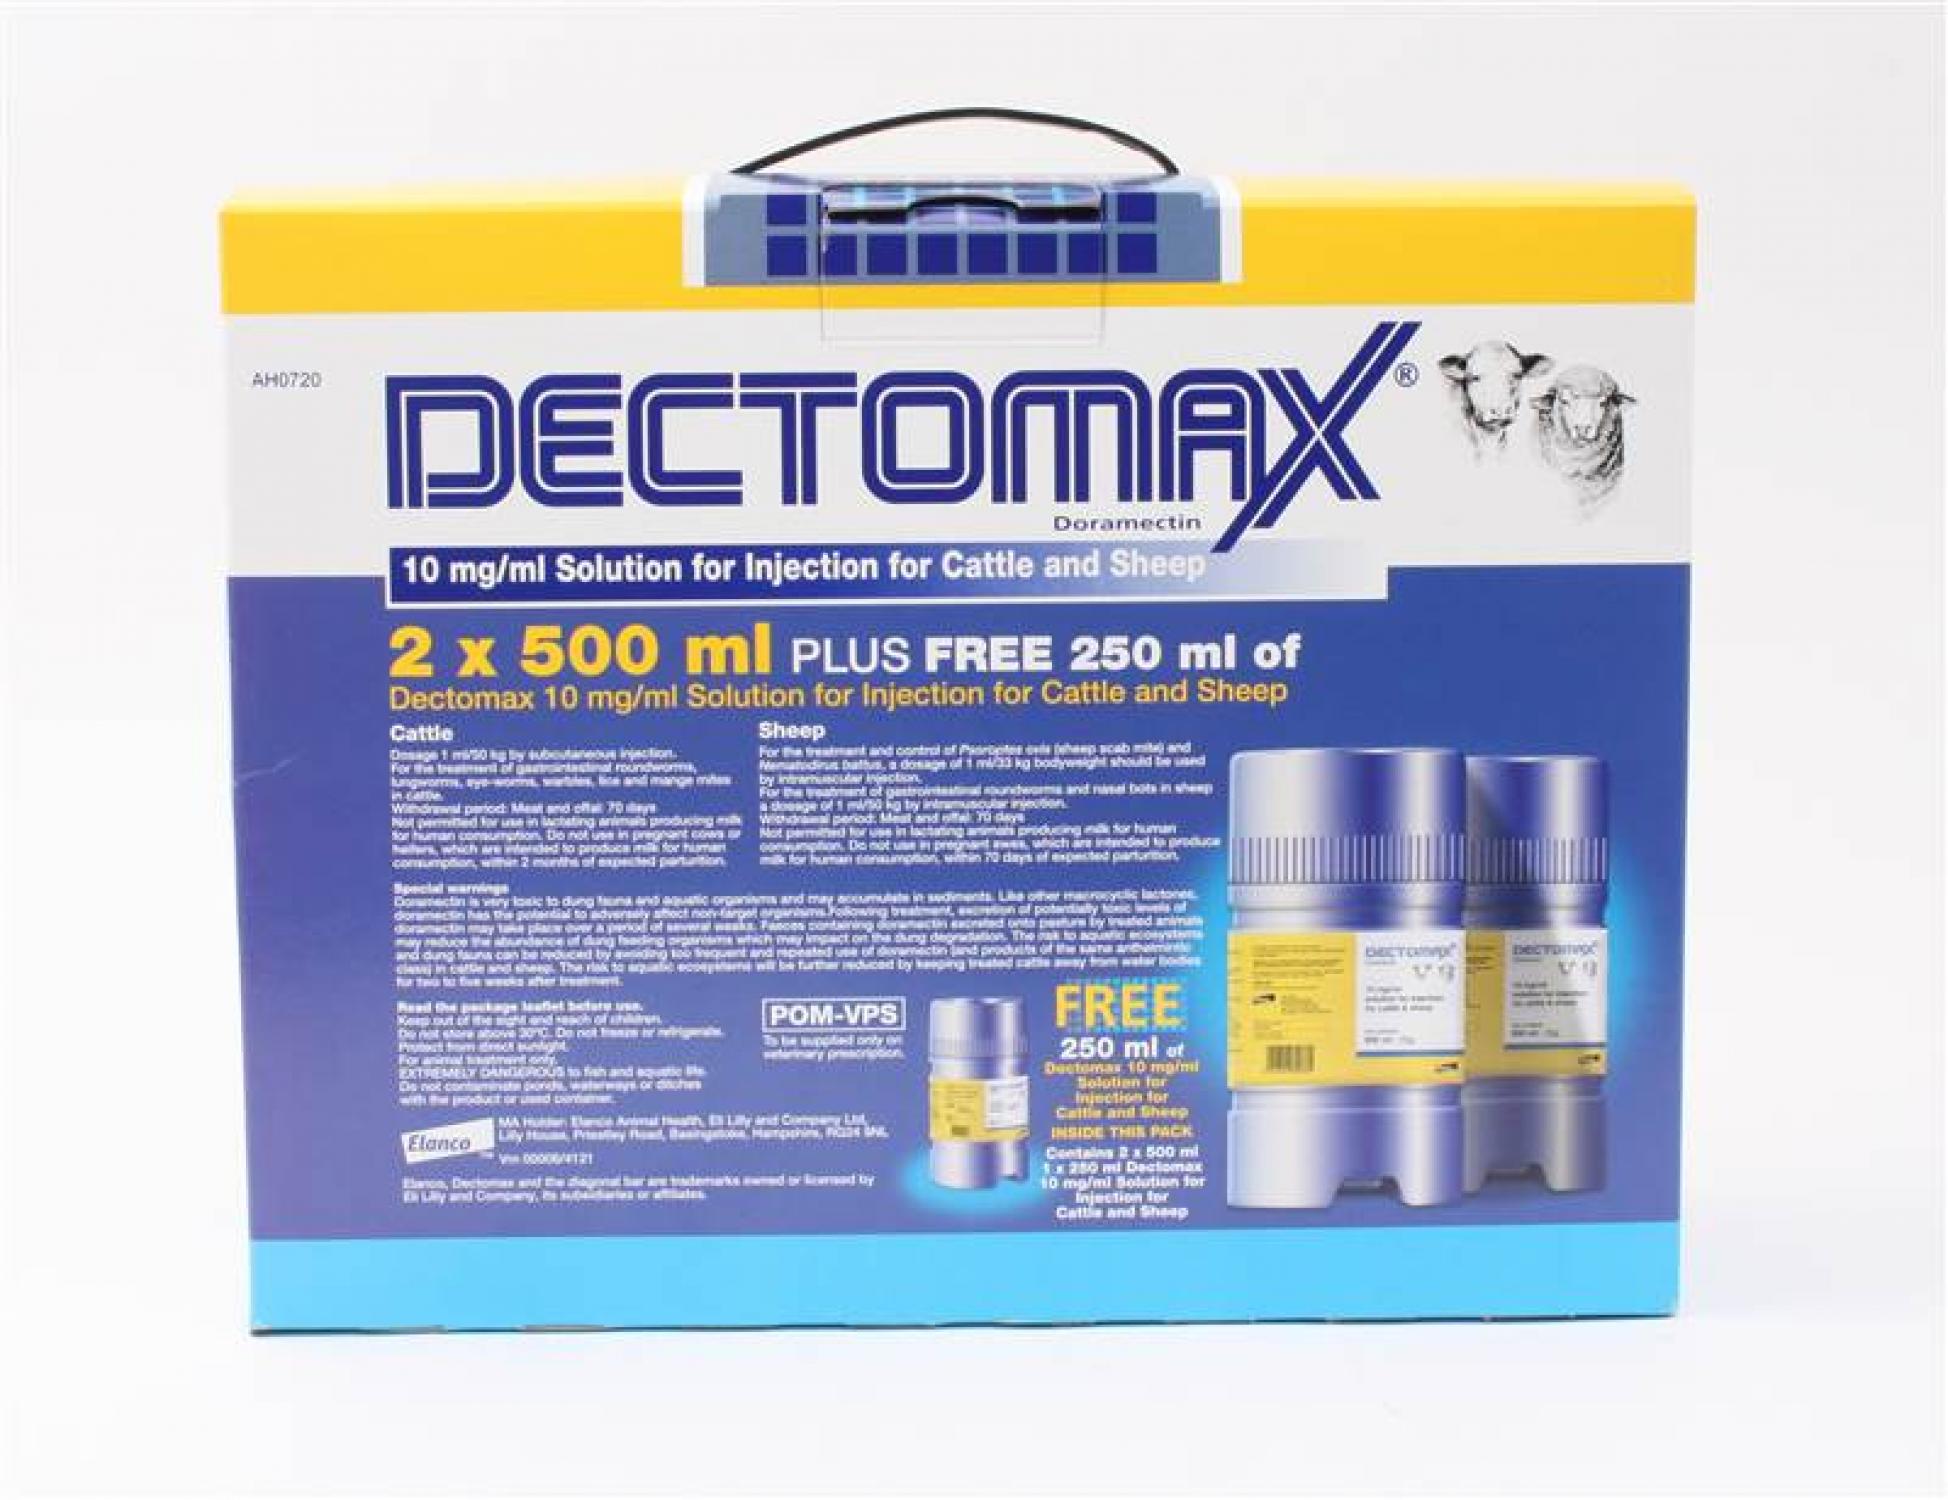 Buy Dectomax Injection Promotion Pack 1250ml from Fane Valley Stores